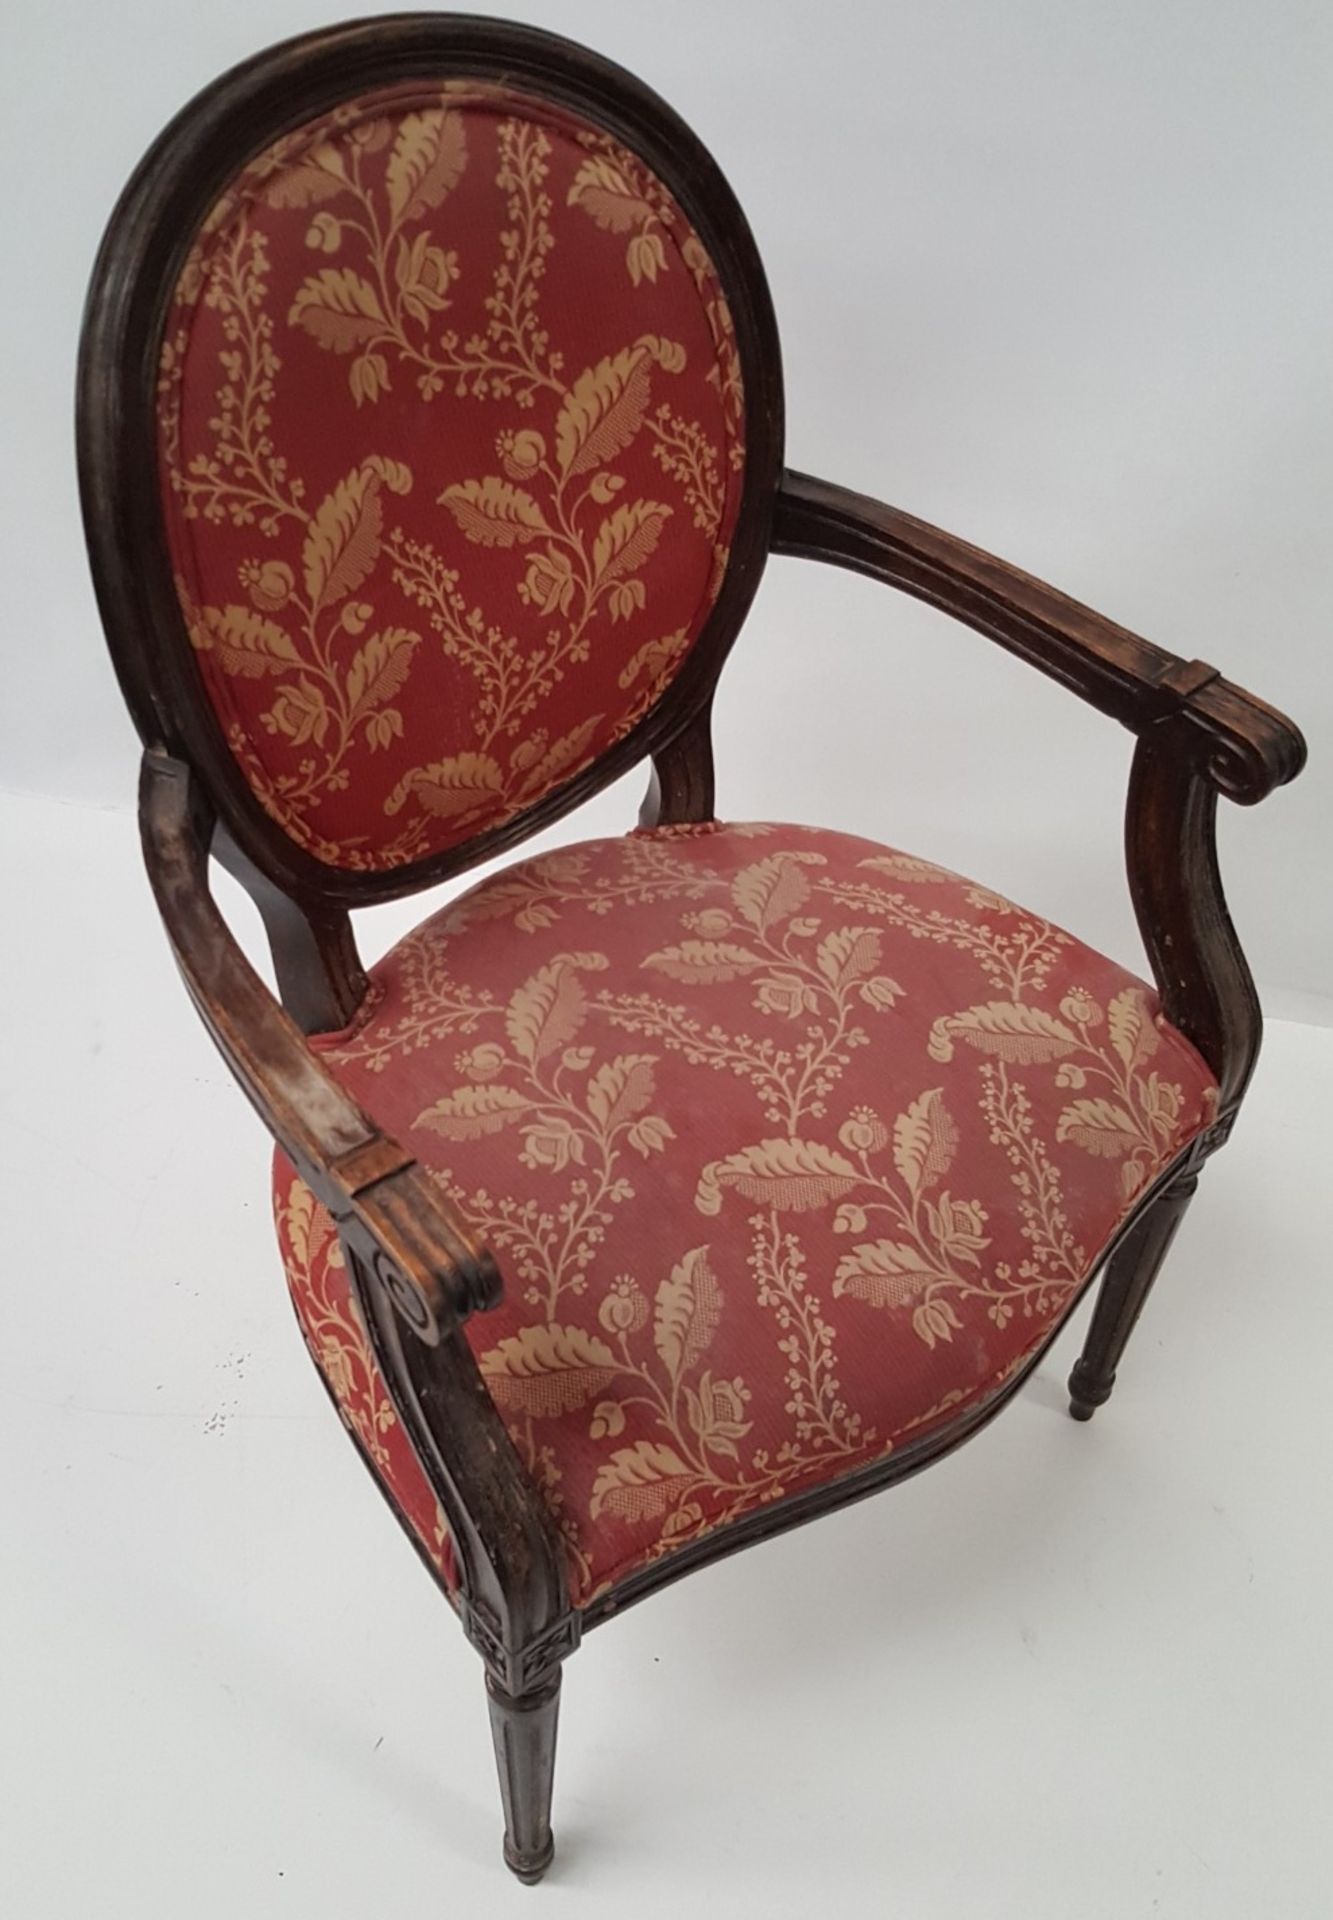 6 x Antique Style Wooden Chairs Upholstered In Red Fabric With Gold Leaf Design - CL431 - Image 4 of 8